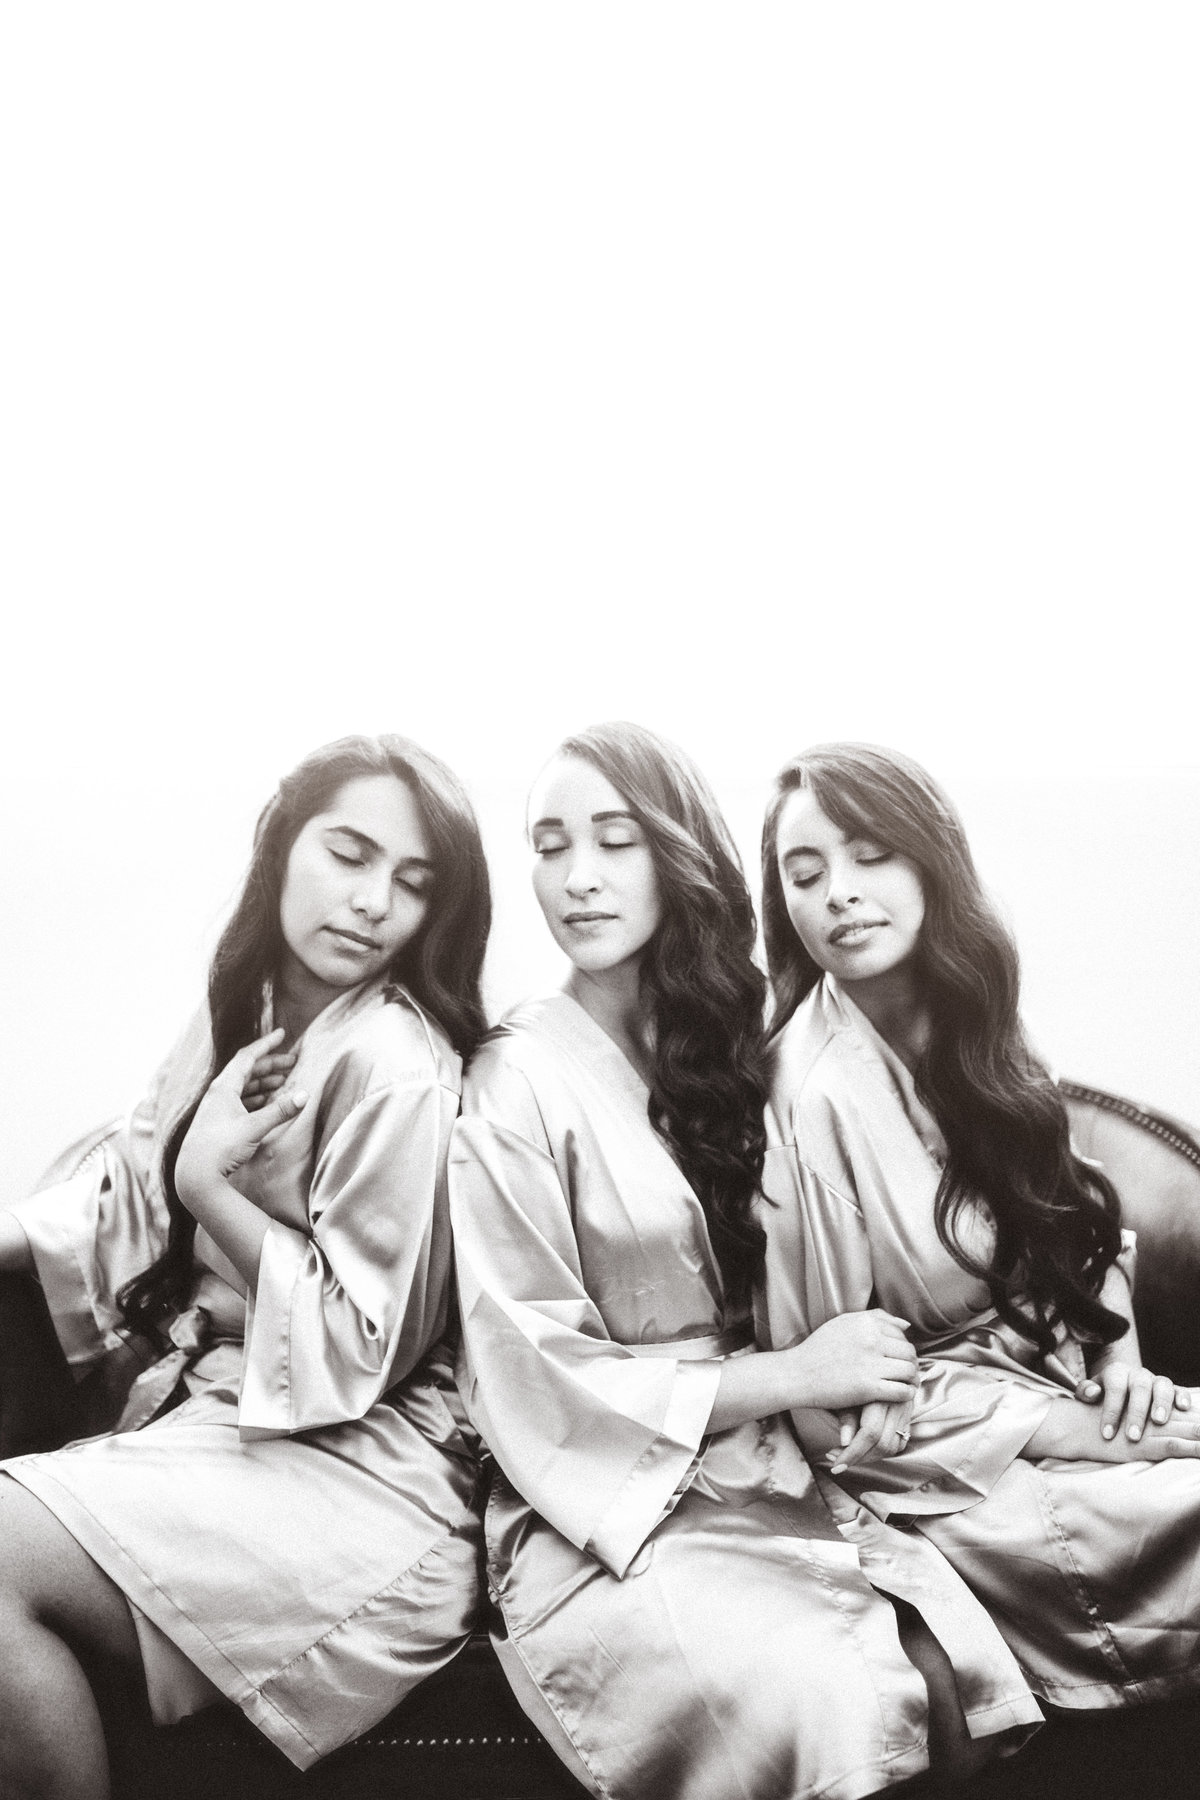 Wedding Photograph Of Three Women in Robe Black And White Los Angeles